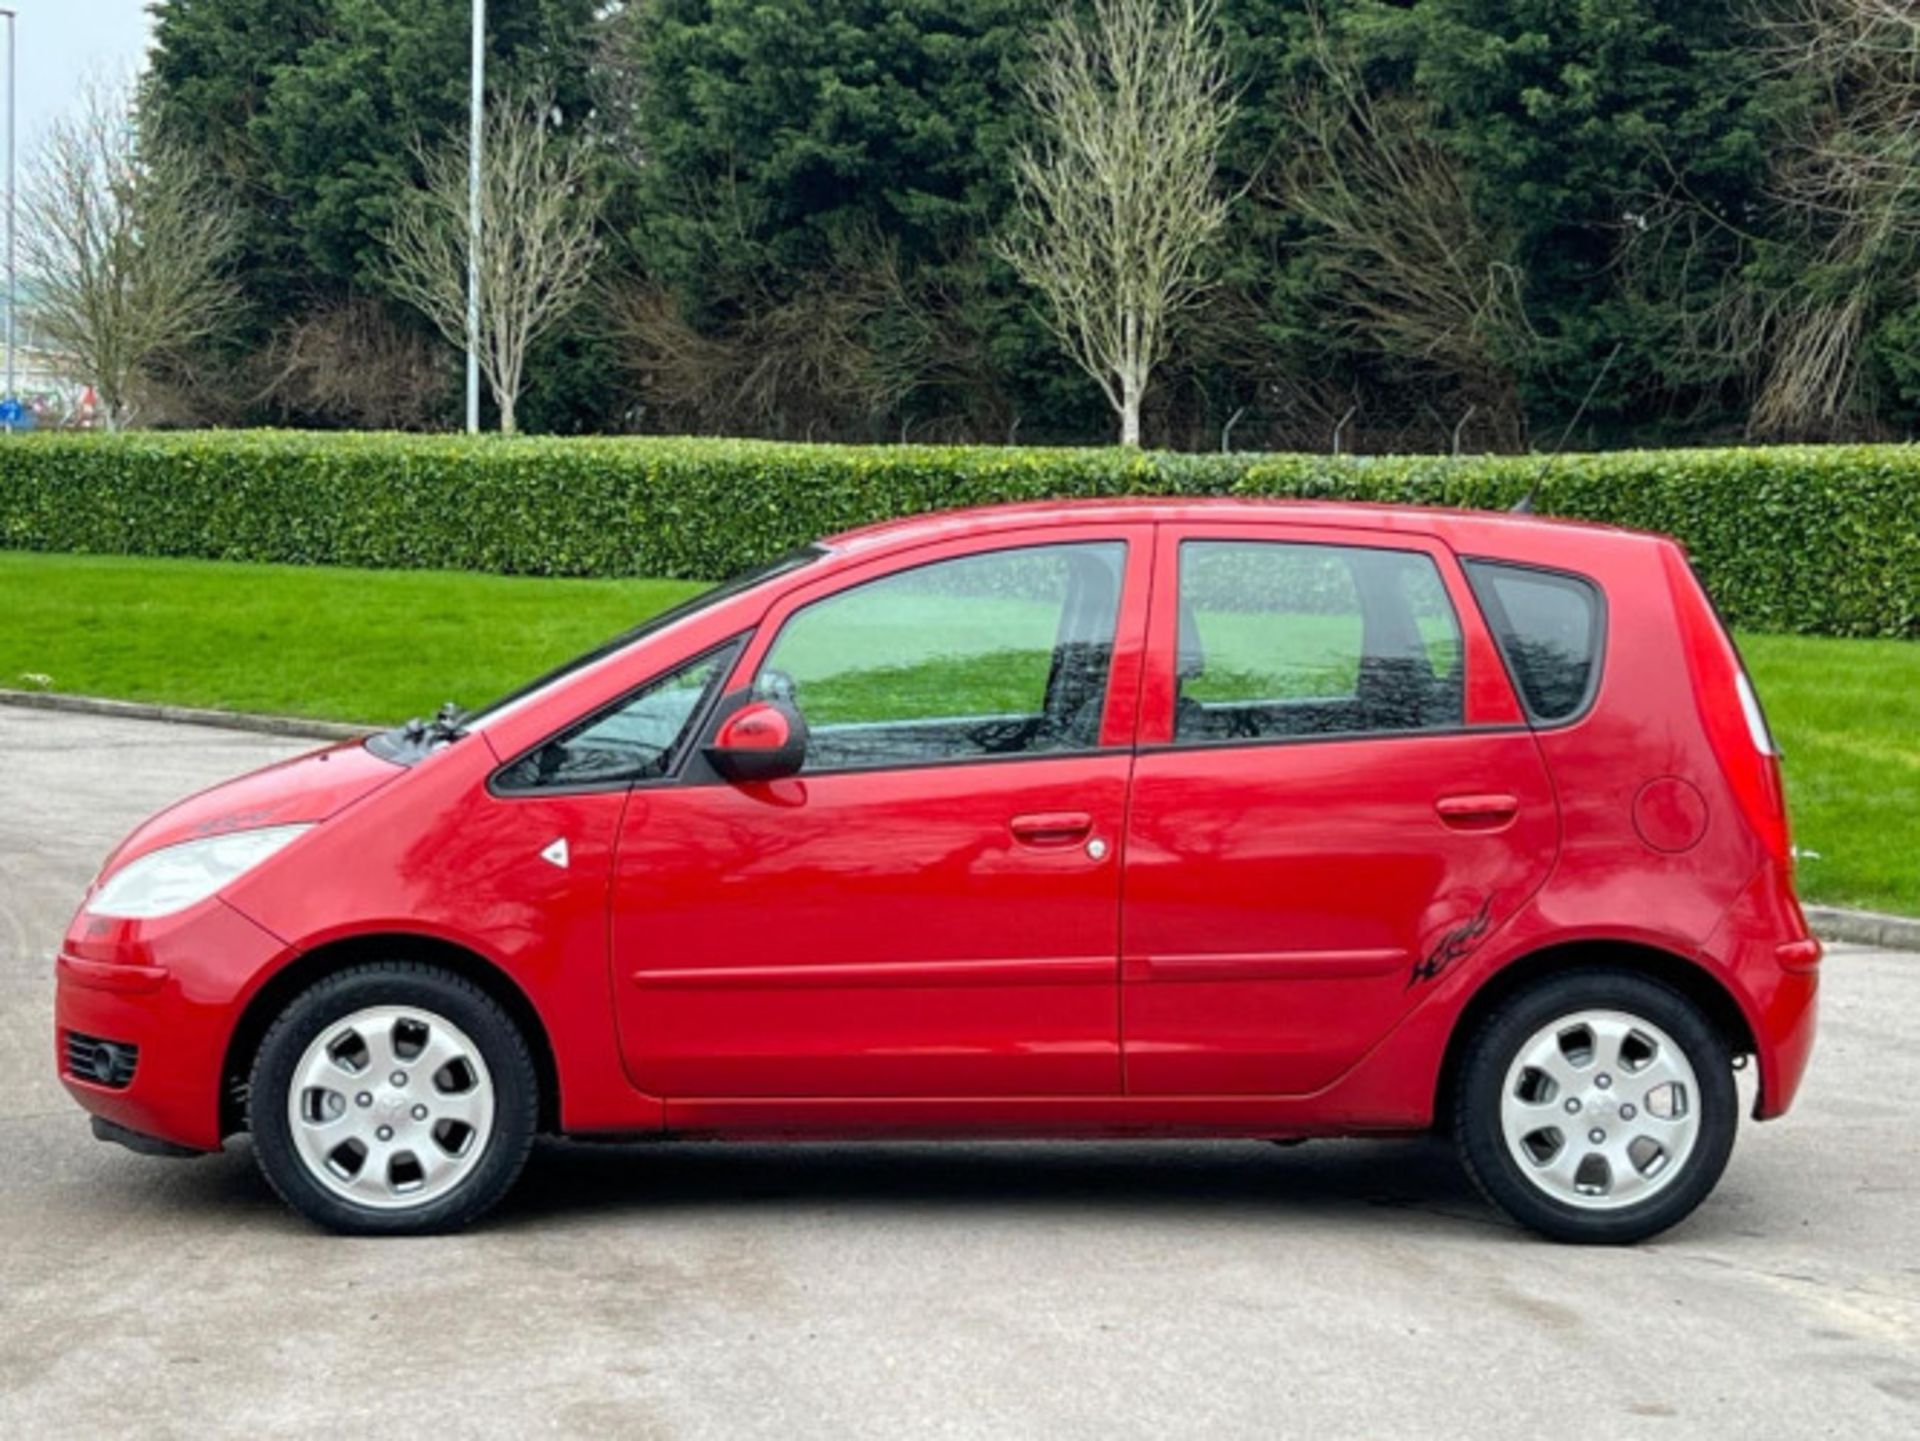 2007 MITSUBISHI COLT 1.5 DI-D DIESEL AUTOMATIC >>--NO VAT ON HAMMER--<< - Image 174 of 191